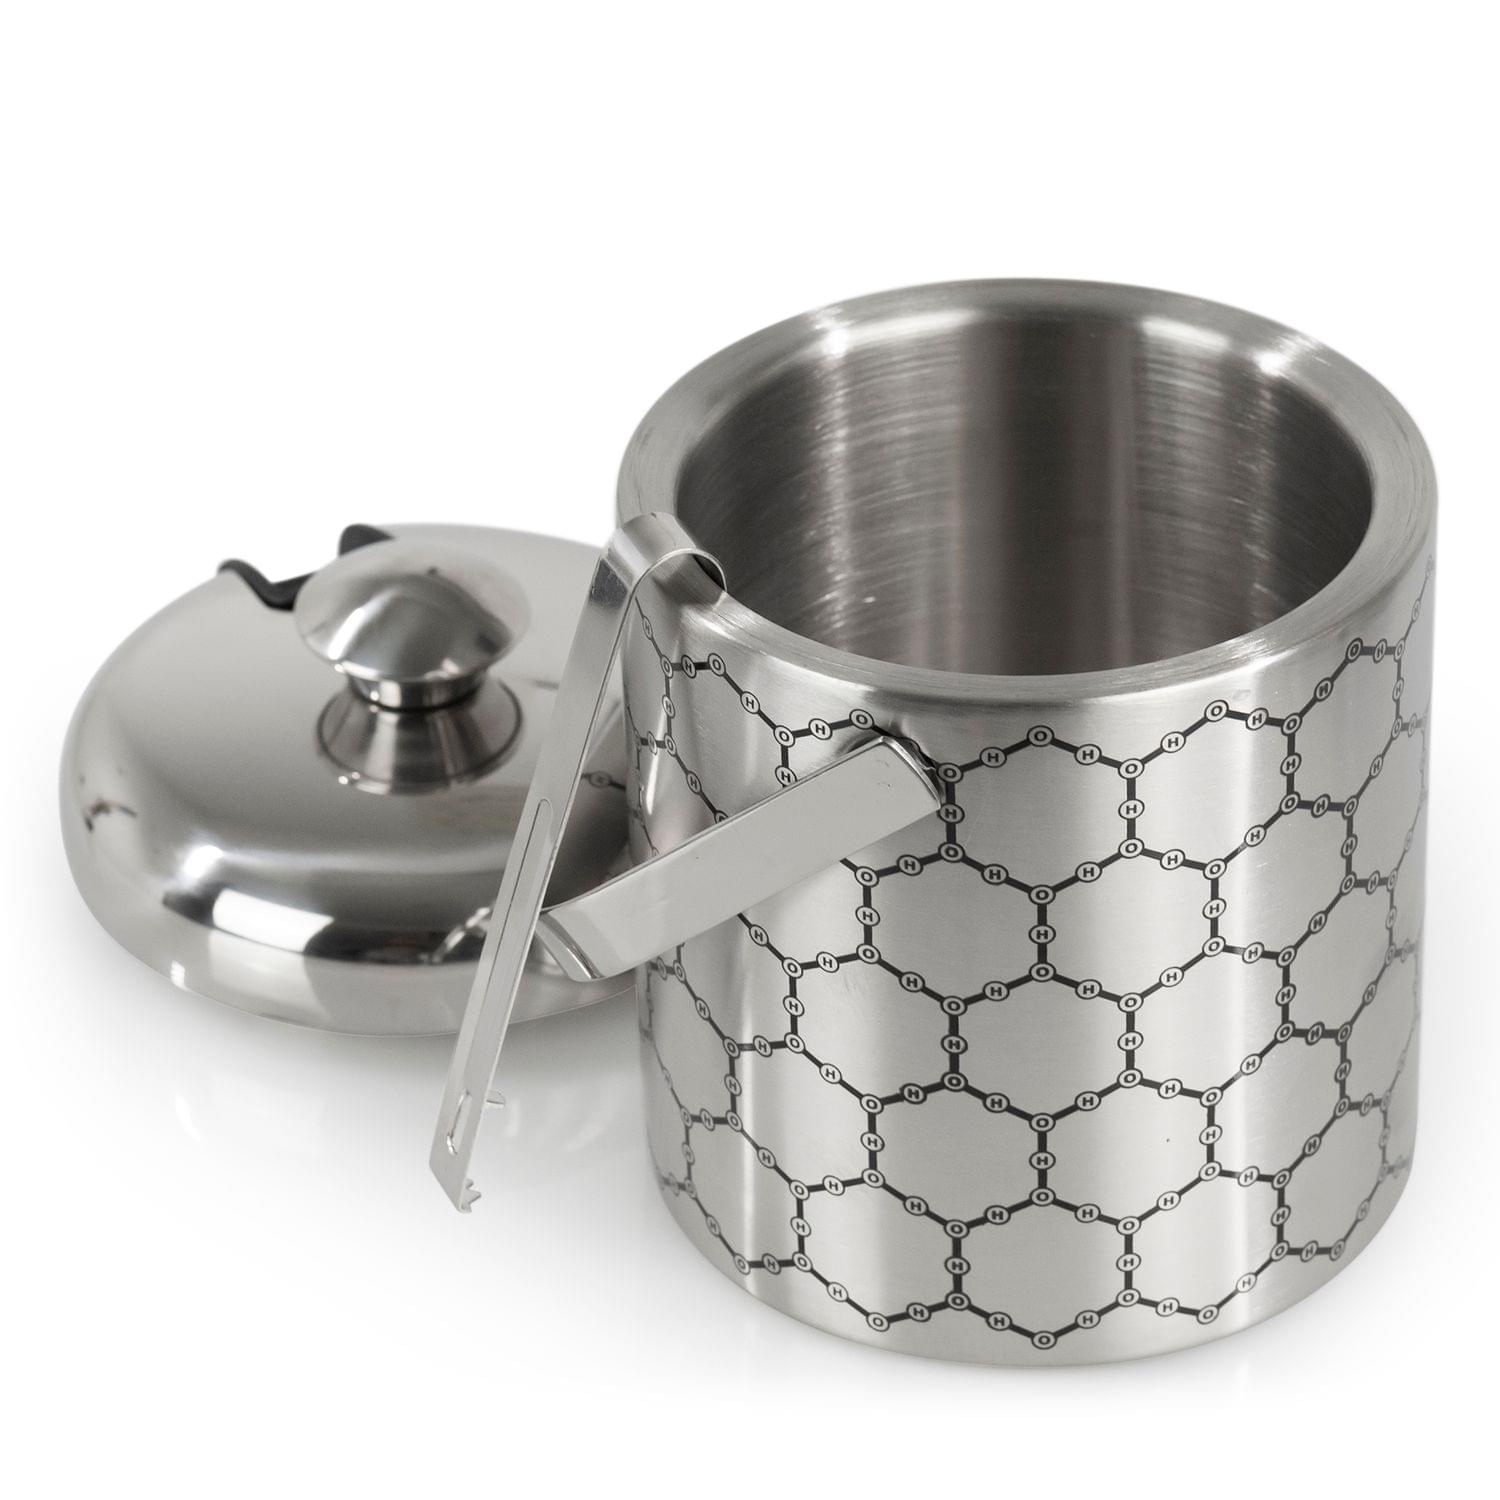 Stainless Steel Ice Bucket With Ice Molecule Pattern | Includes Set Of Ice Tongs